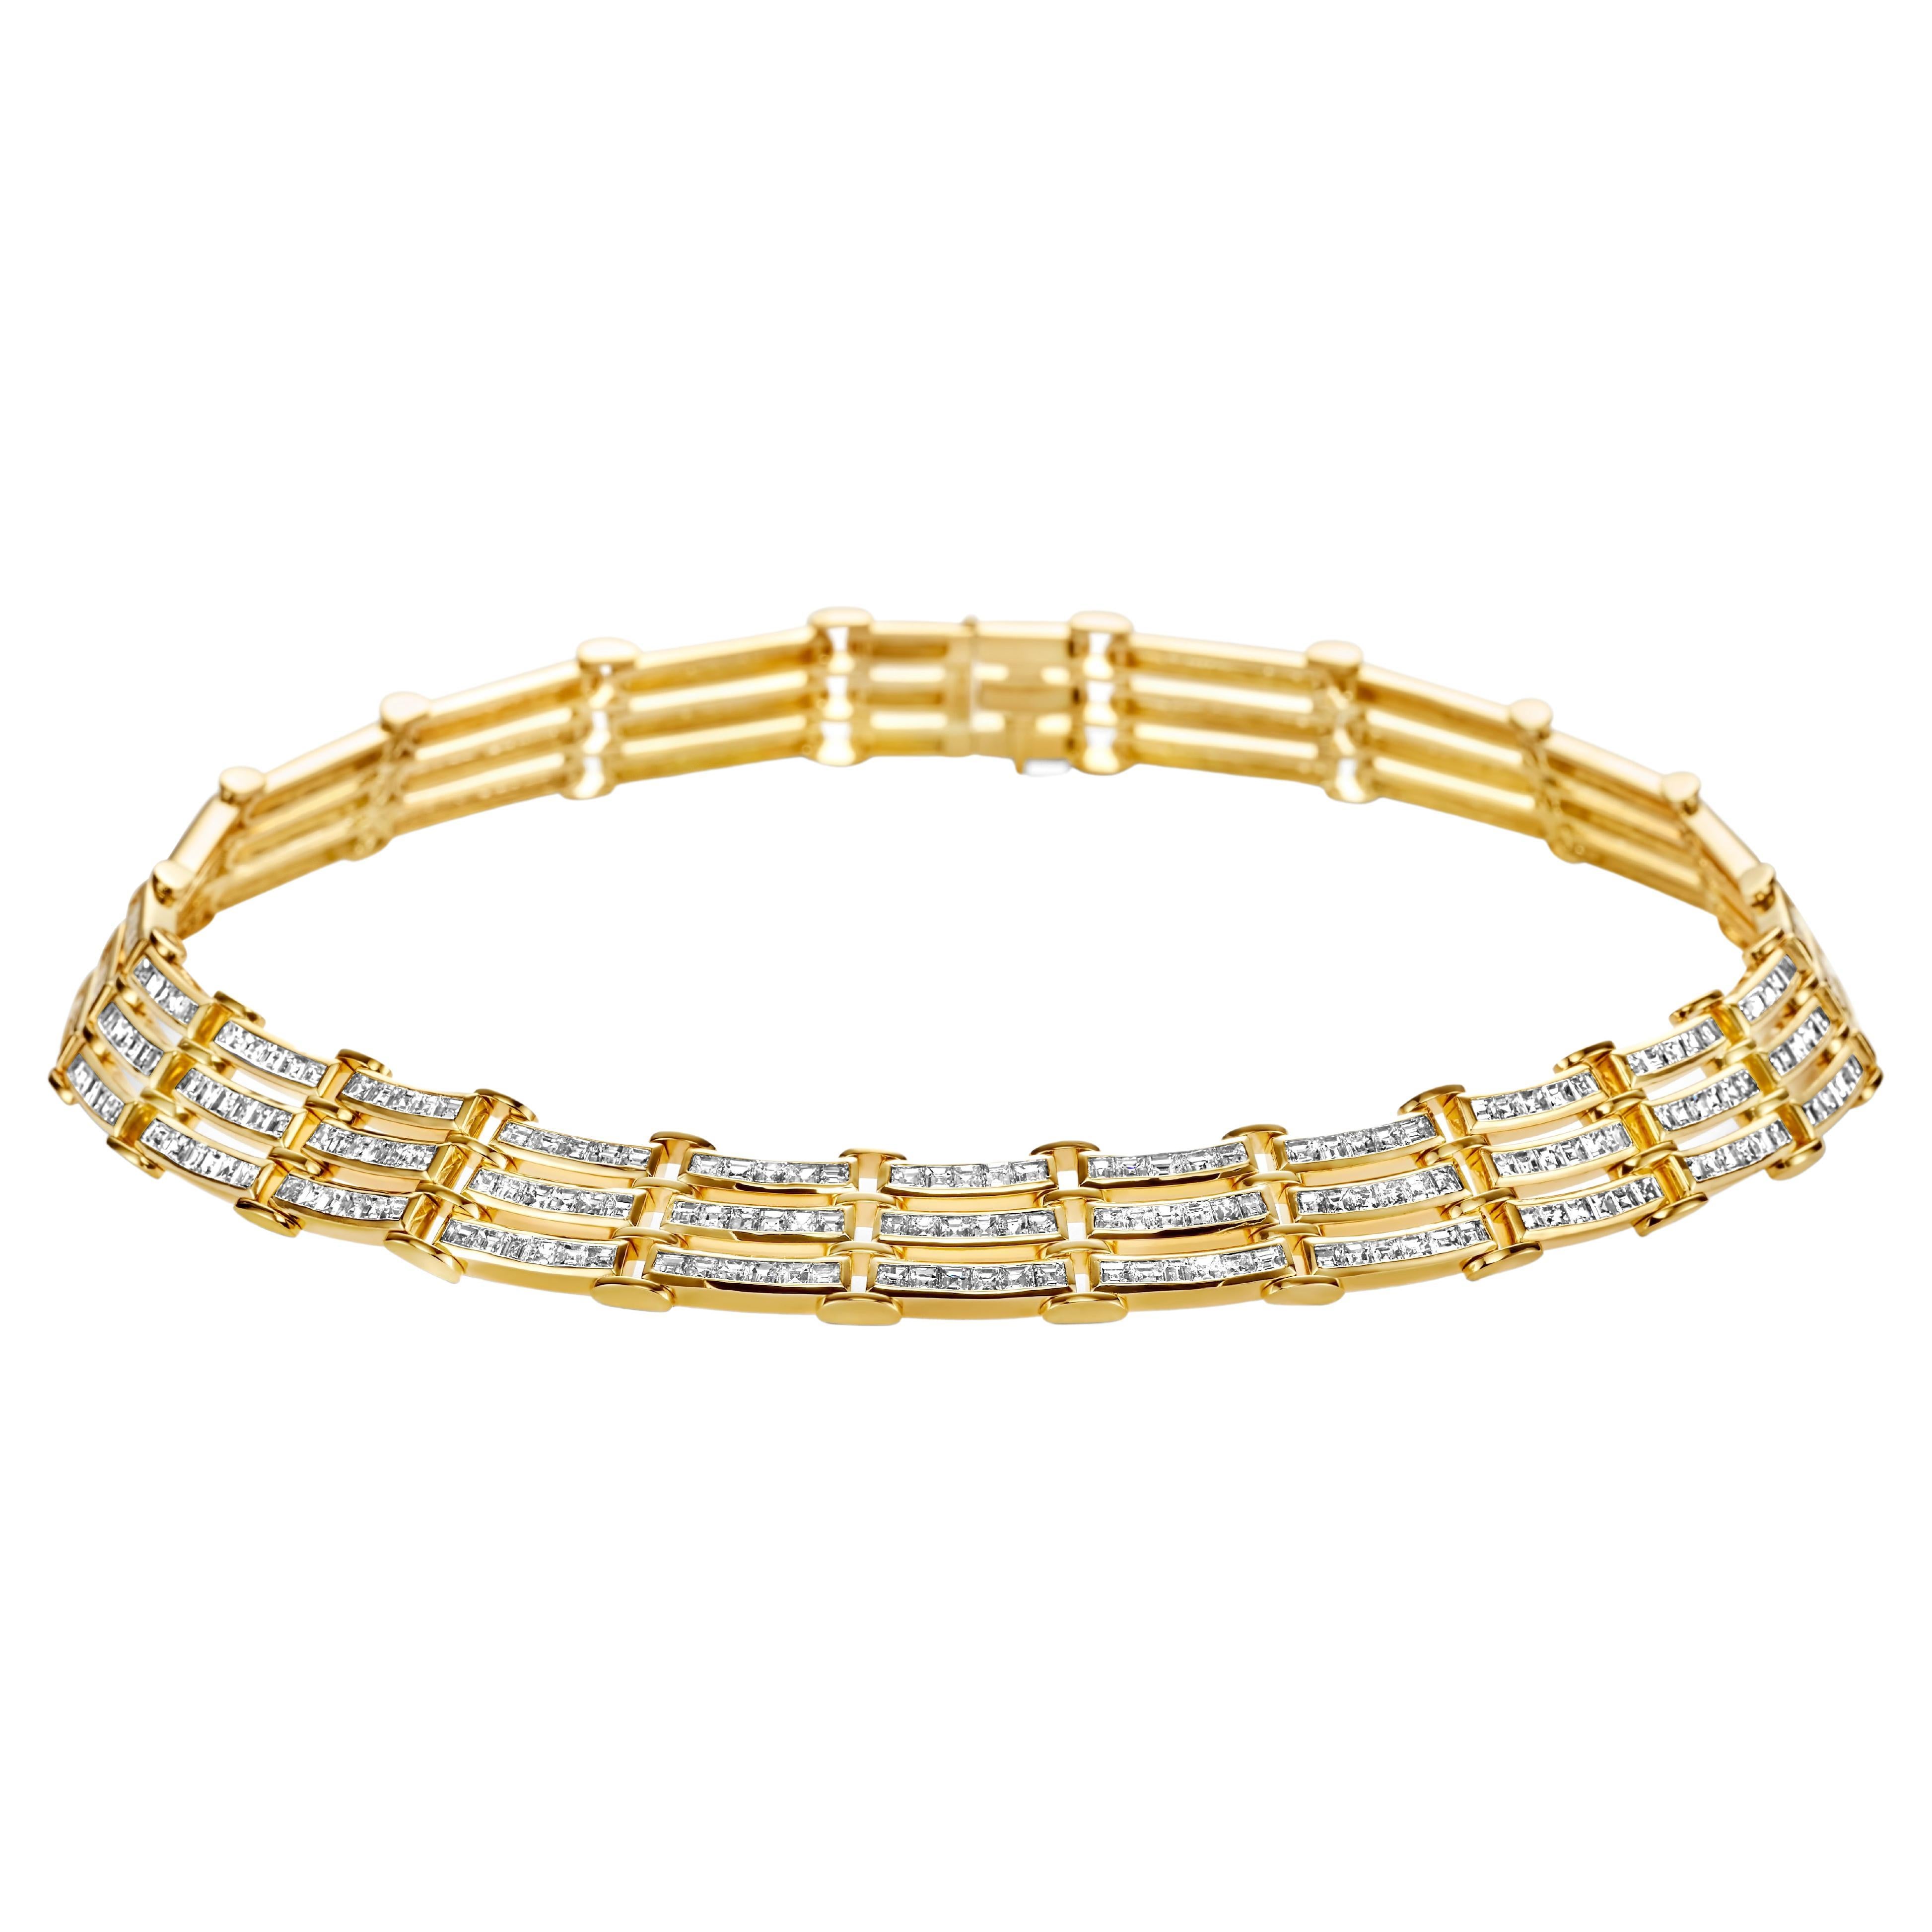 Gorgeous Adler Genève 18 kt. Yellow Gold Choker Necklace & Matching Diamond Bracelet from Estate of The Sultan Of Oman Qaboos Bin Said, Total 37 Carat Diamonds top Quality & Color

Necklace
Diamonds: Square cut diamonds, together approx. 22.6